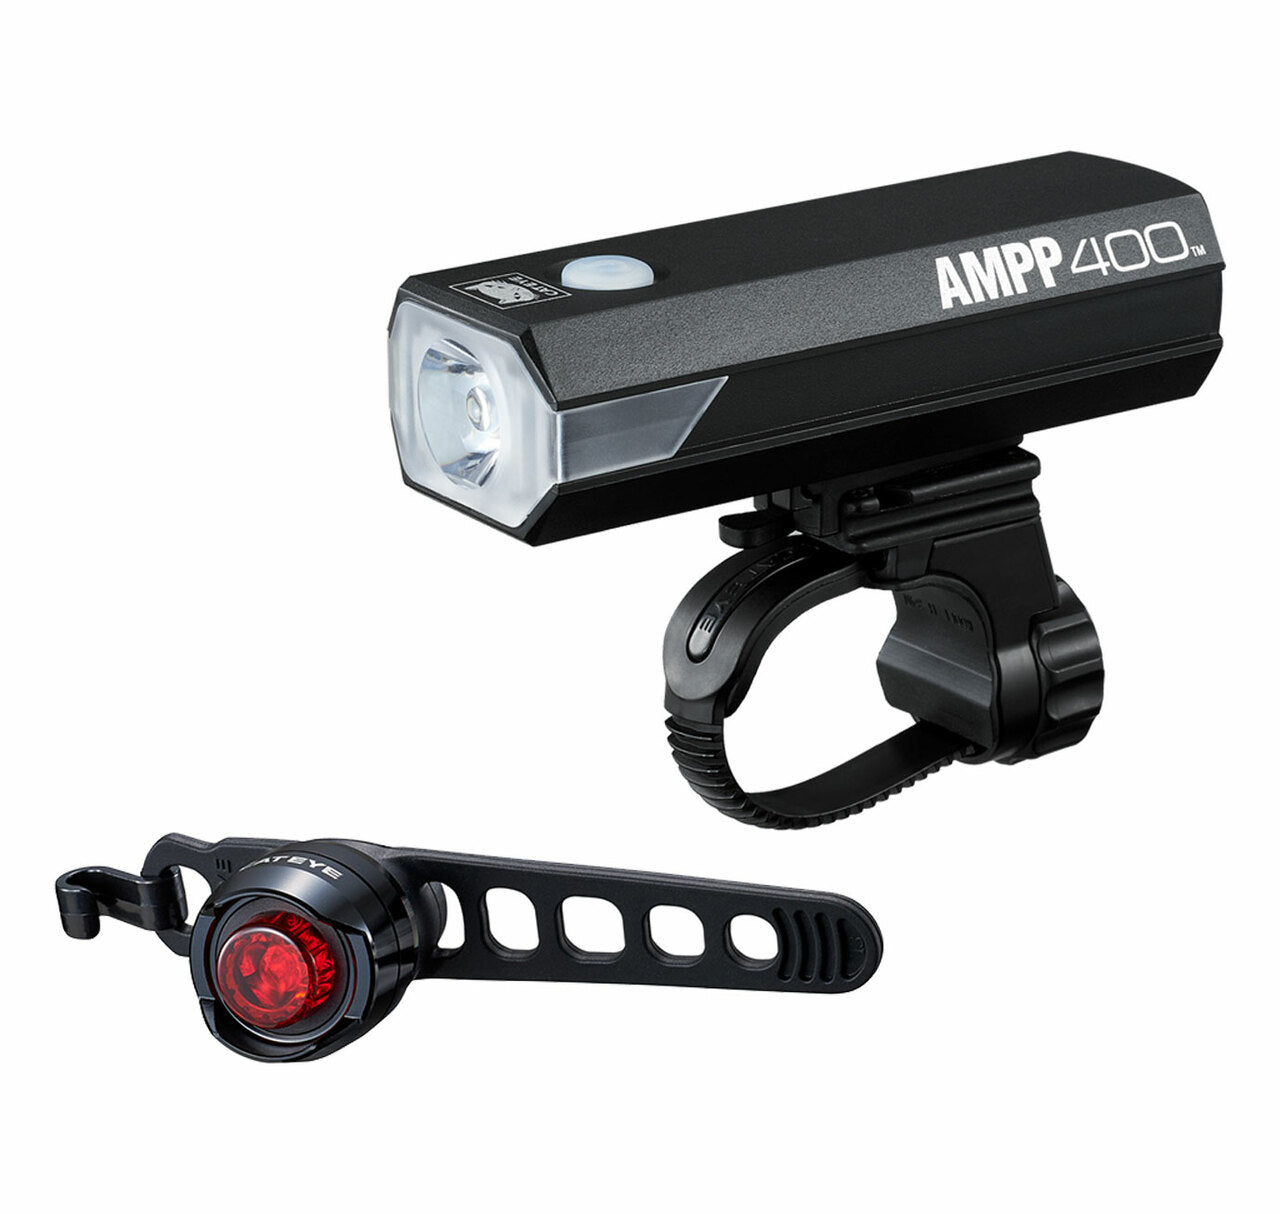 Cateye AMPP400 & ORB (Battery Operated) Combo Cycle Light - Cyclop.in